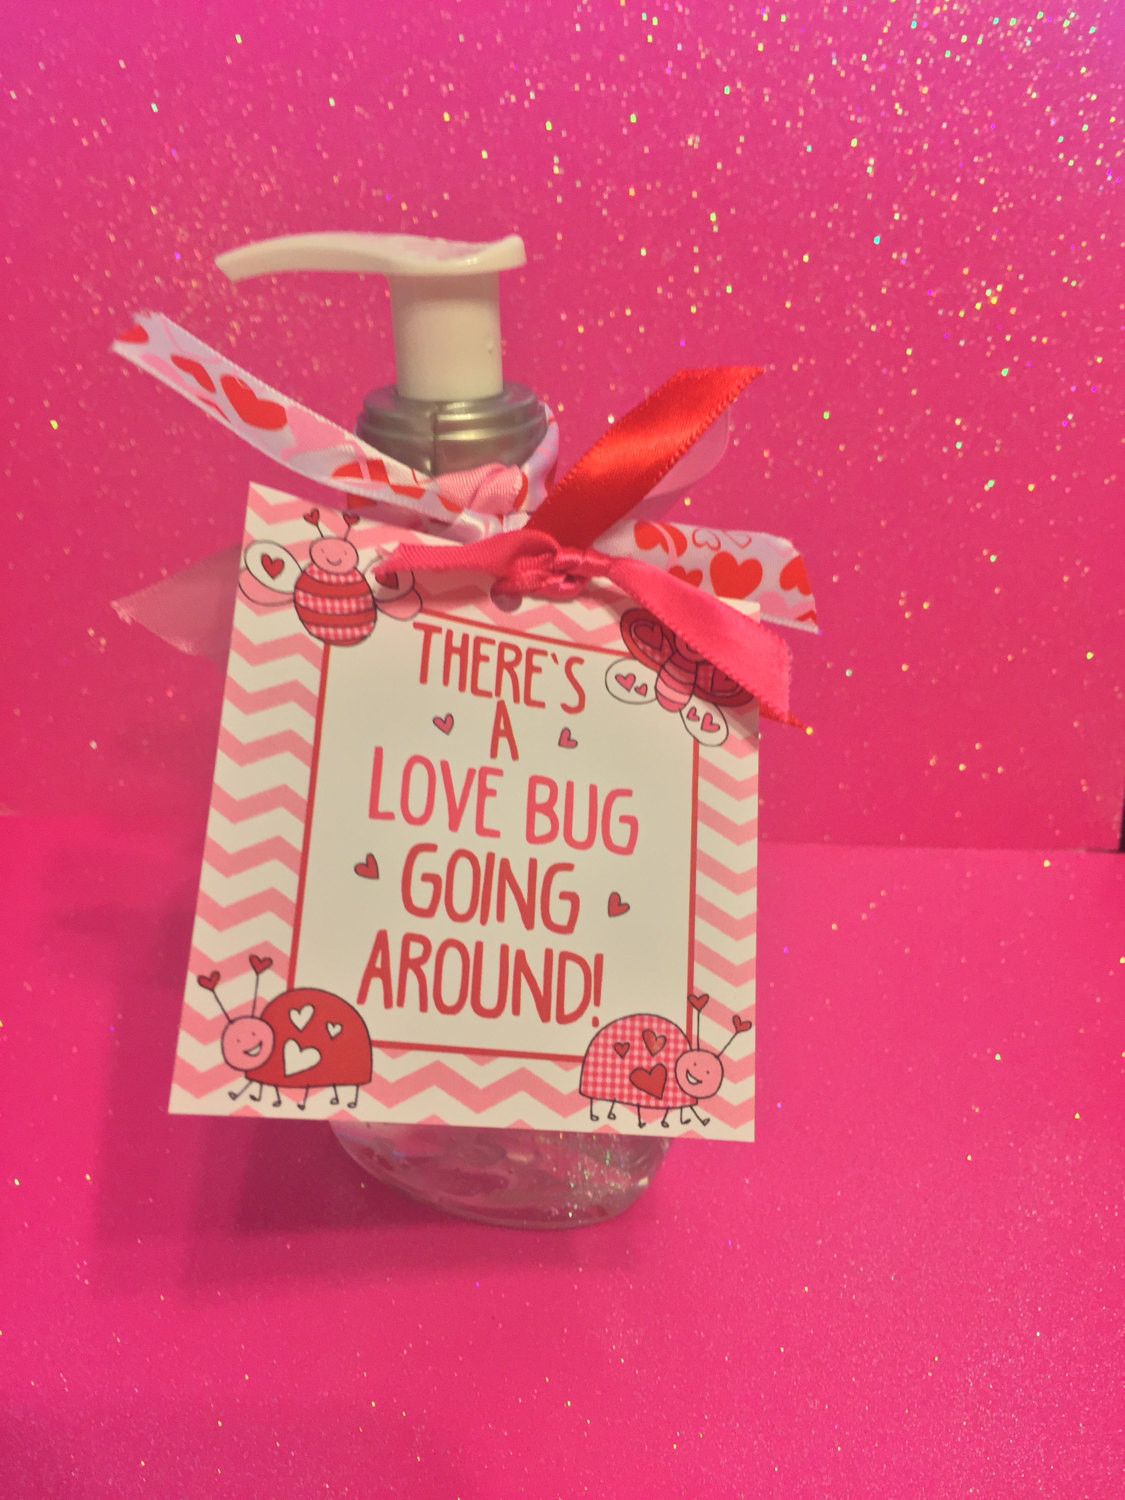 Valentine Day Gift Ideas For Coworkers
 Valentines Love Bug Hand Sanitizer Great Gift for Teachers